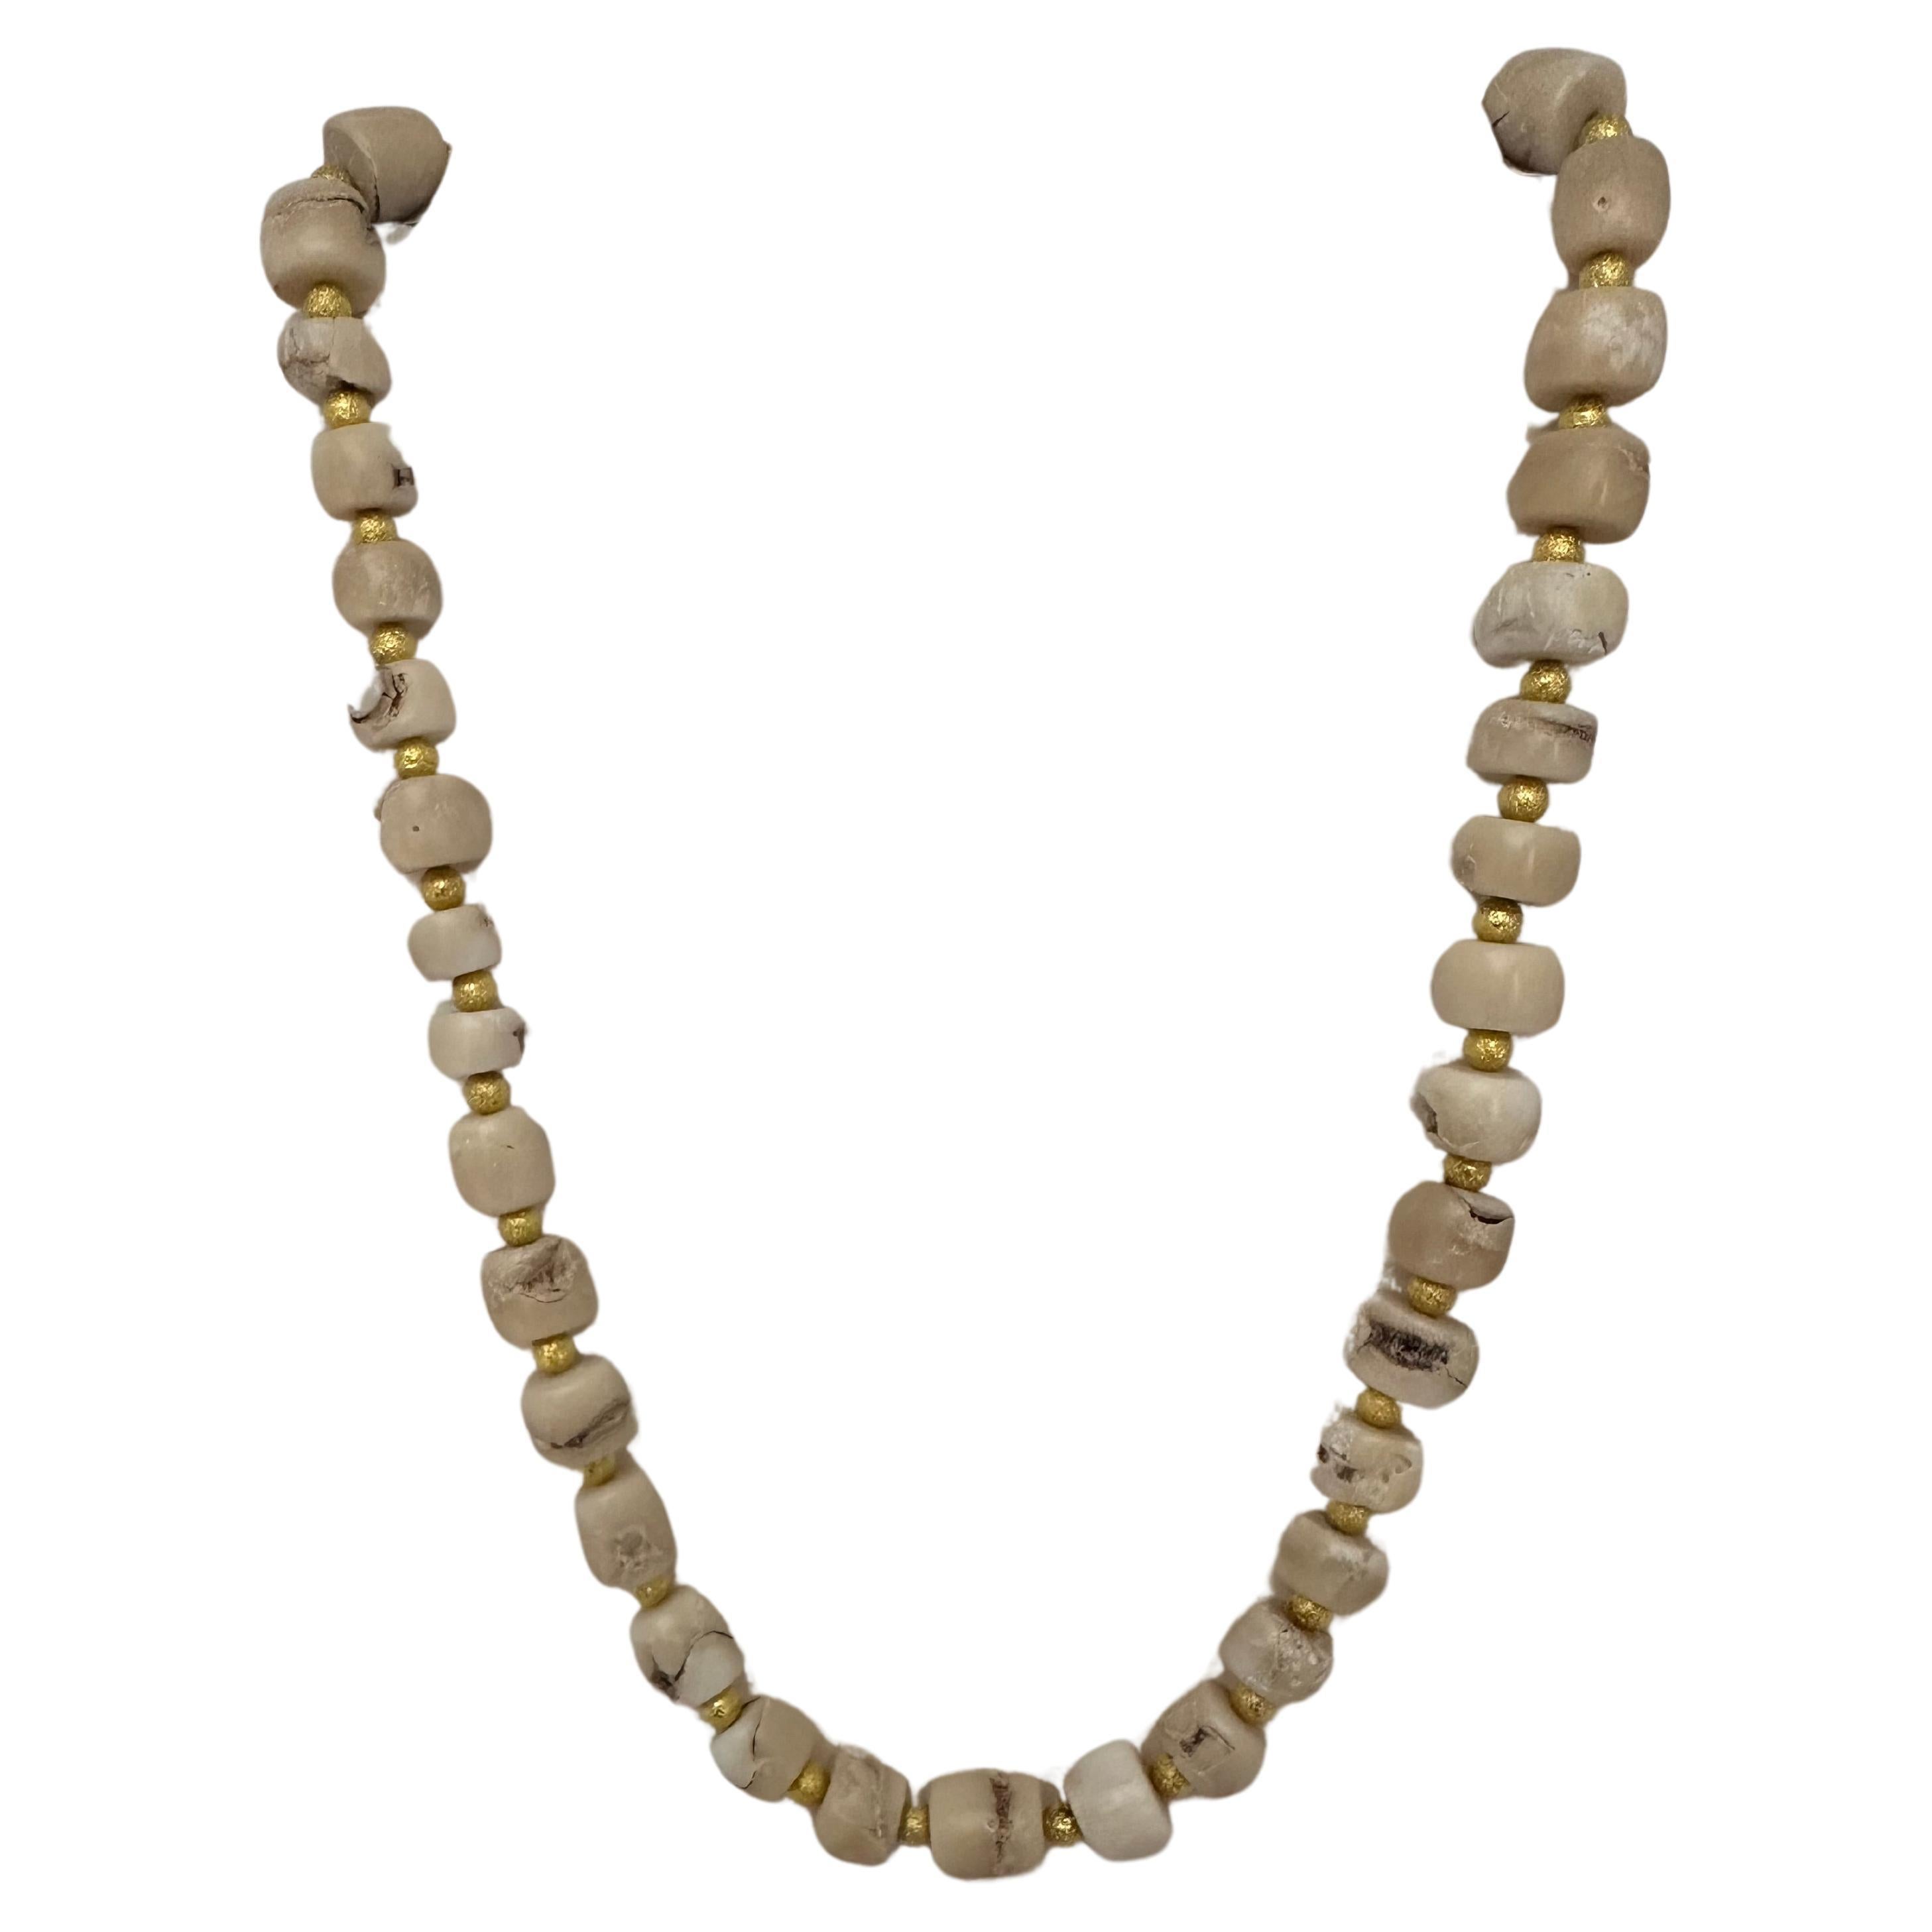 Handmade Gold Plated Beads & White Barrel Shape Coral Beaded 26.5" Necklace #C30 For Sale